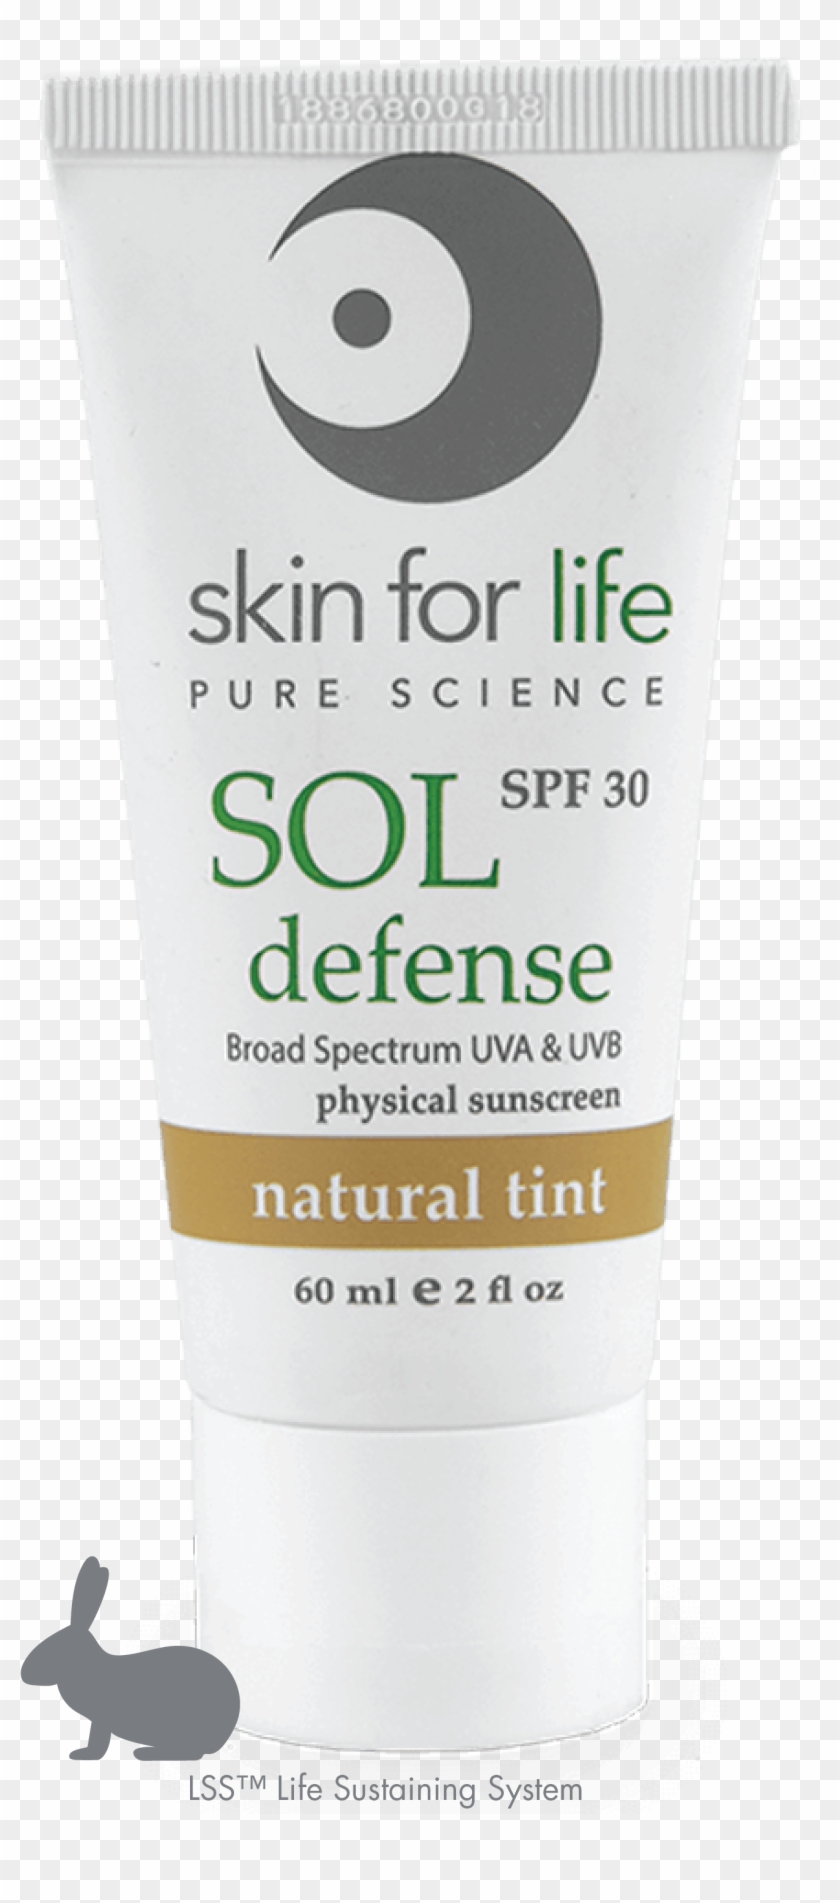 Sol Defense Spf 30 Natural Tint - Rodan And Fields Reverse Step 4 Clipart #5850608